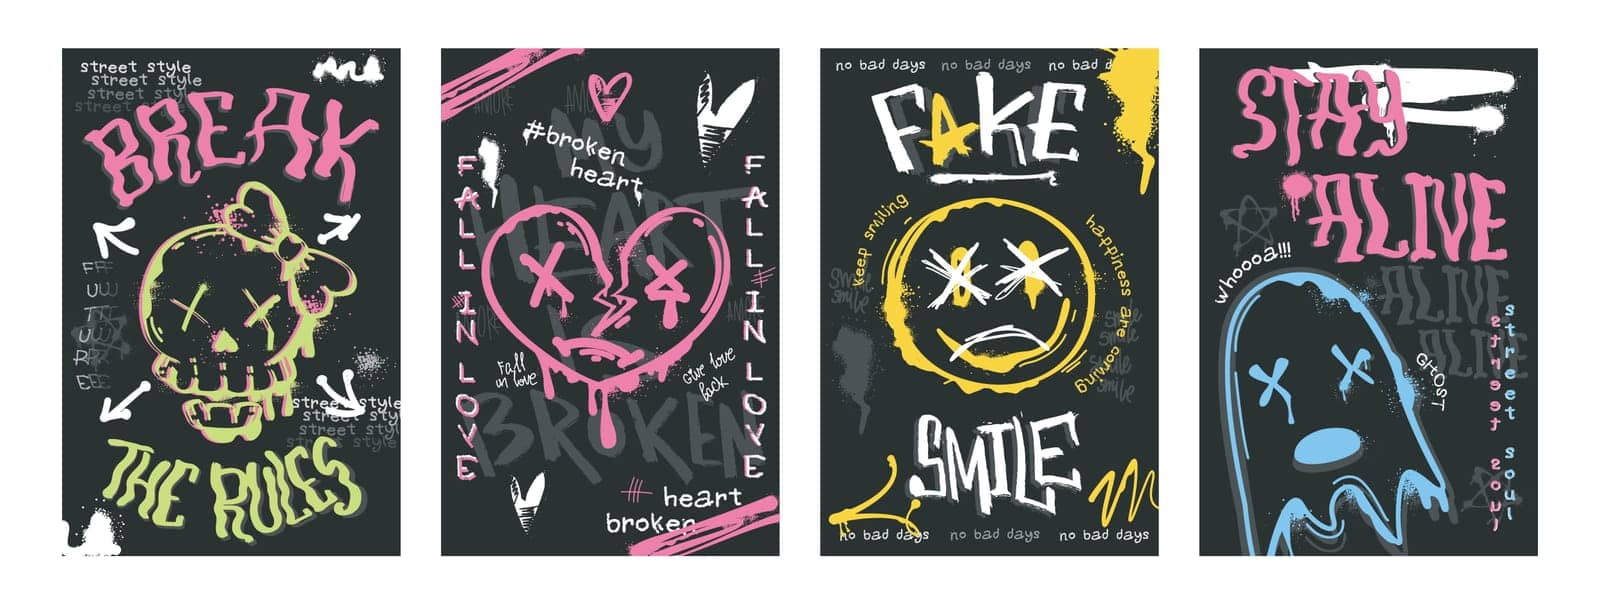 Graffiti poster with spray paint skull, heart sign, ghost, smiling face emoji. by Redgreystock